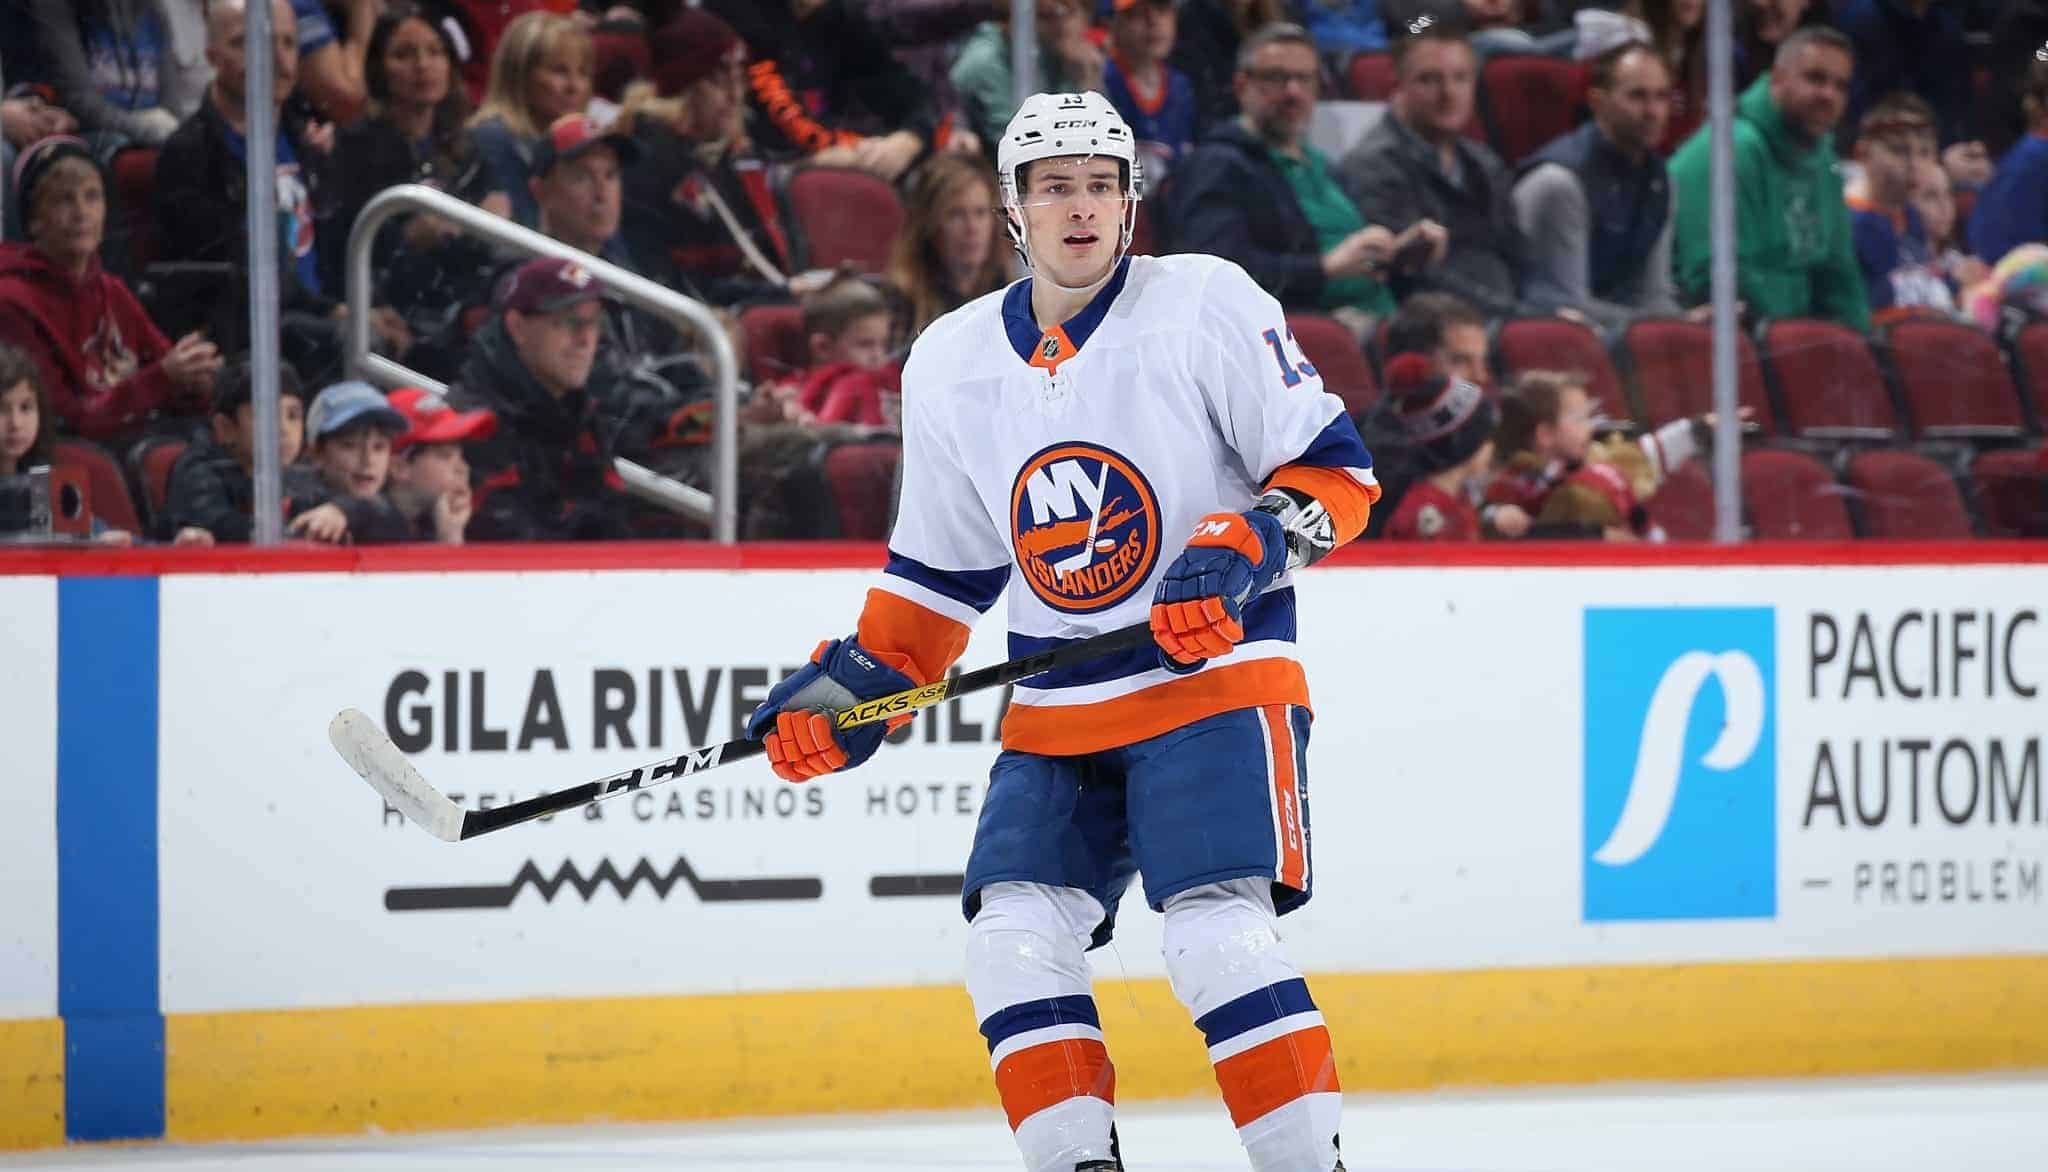 GLENDALE, ARIZONA - FEBRUARY 17: Mathew Barzal #13 of the New York Islanders during the second period of the NHL game against the Arizona Coyotes at Gila River Arena on February 17, 2020 in Glendale, Arizona.